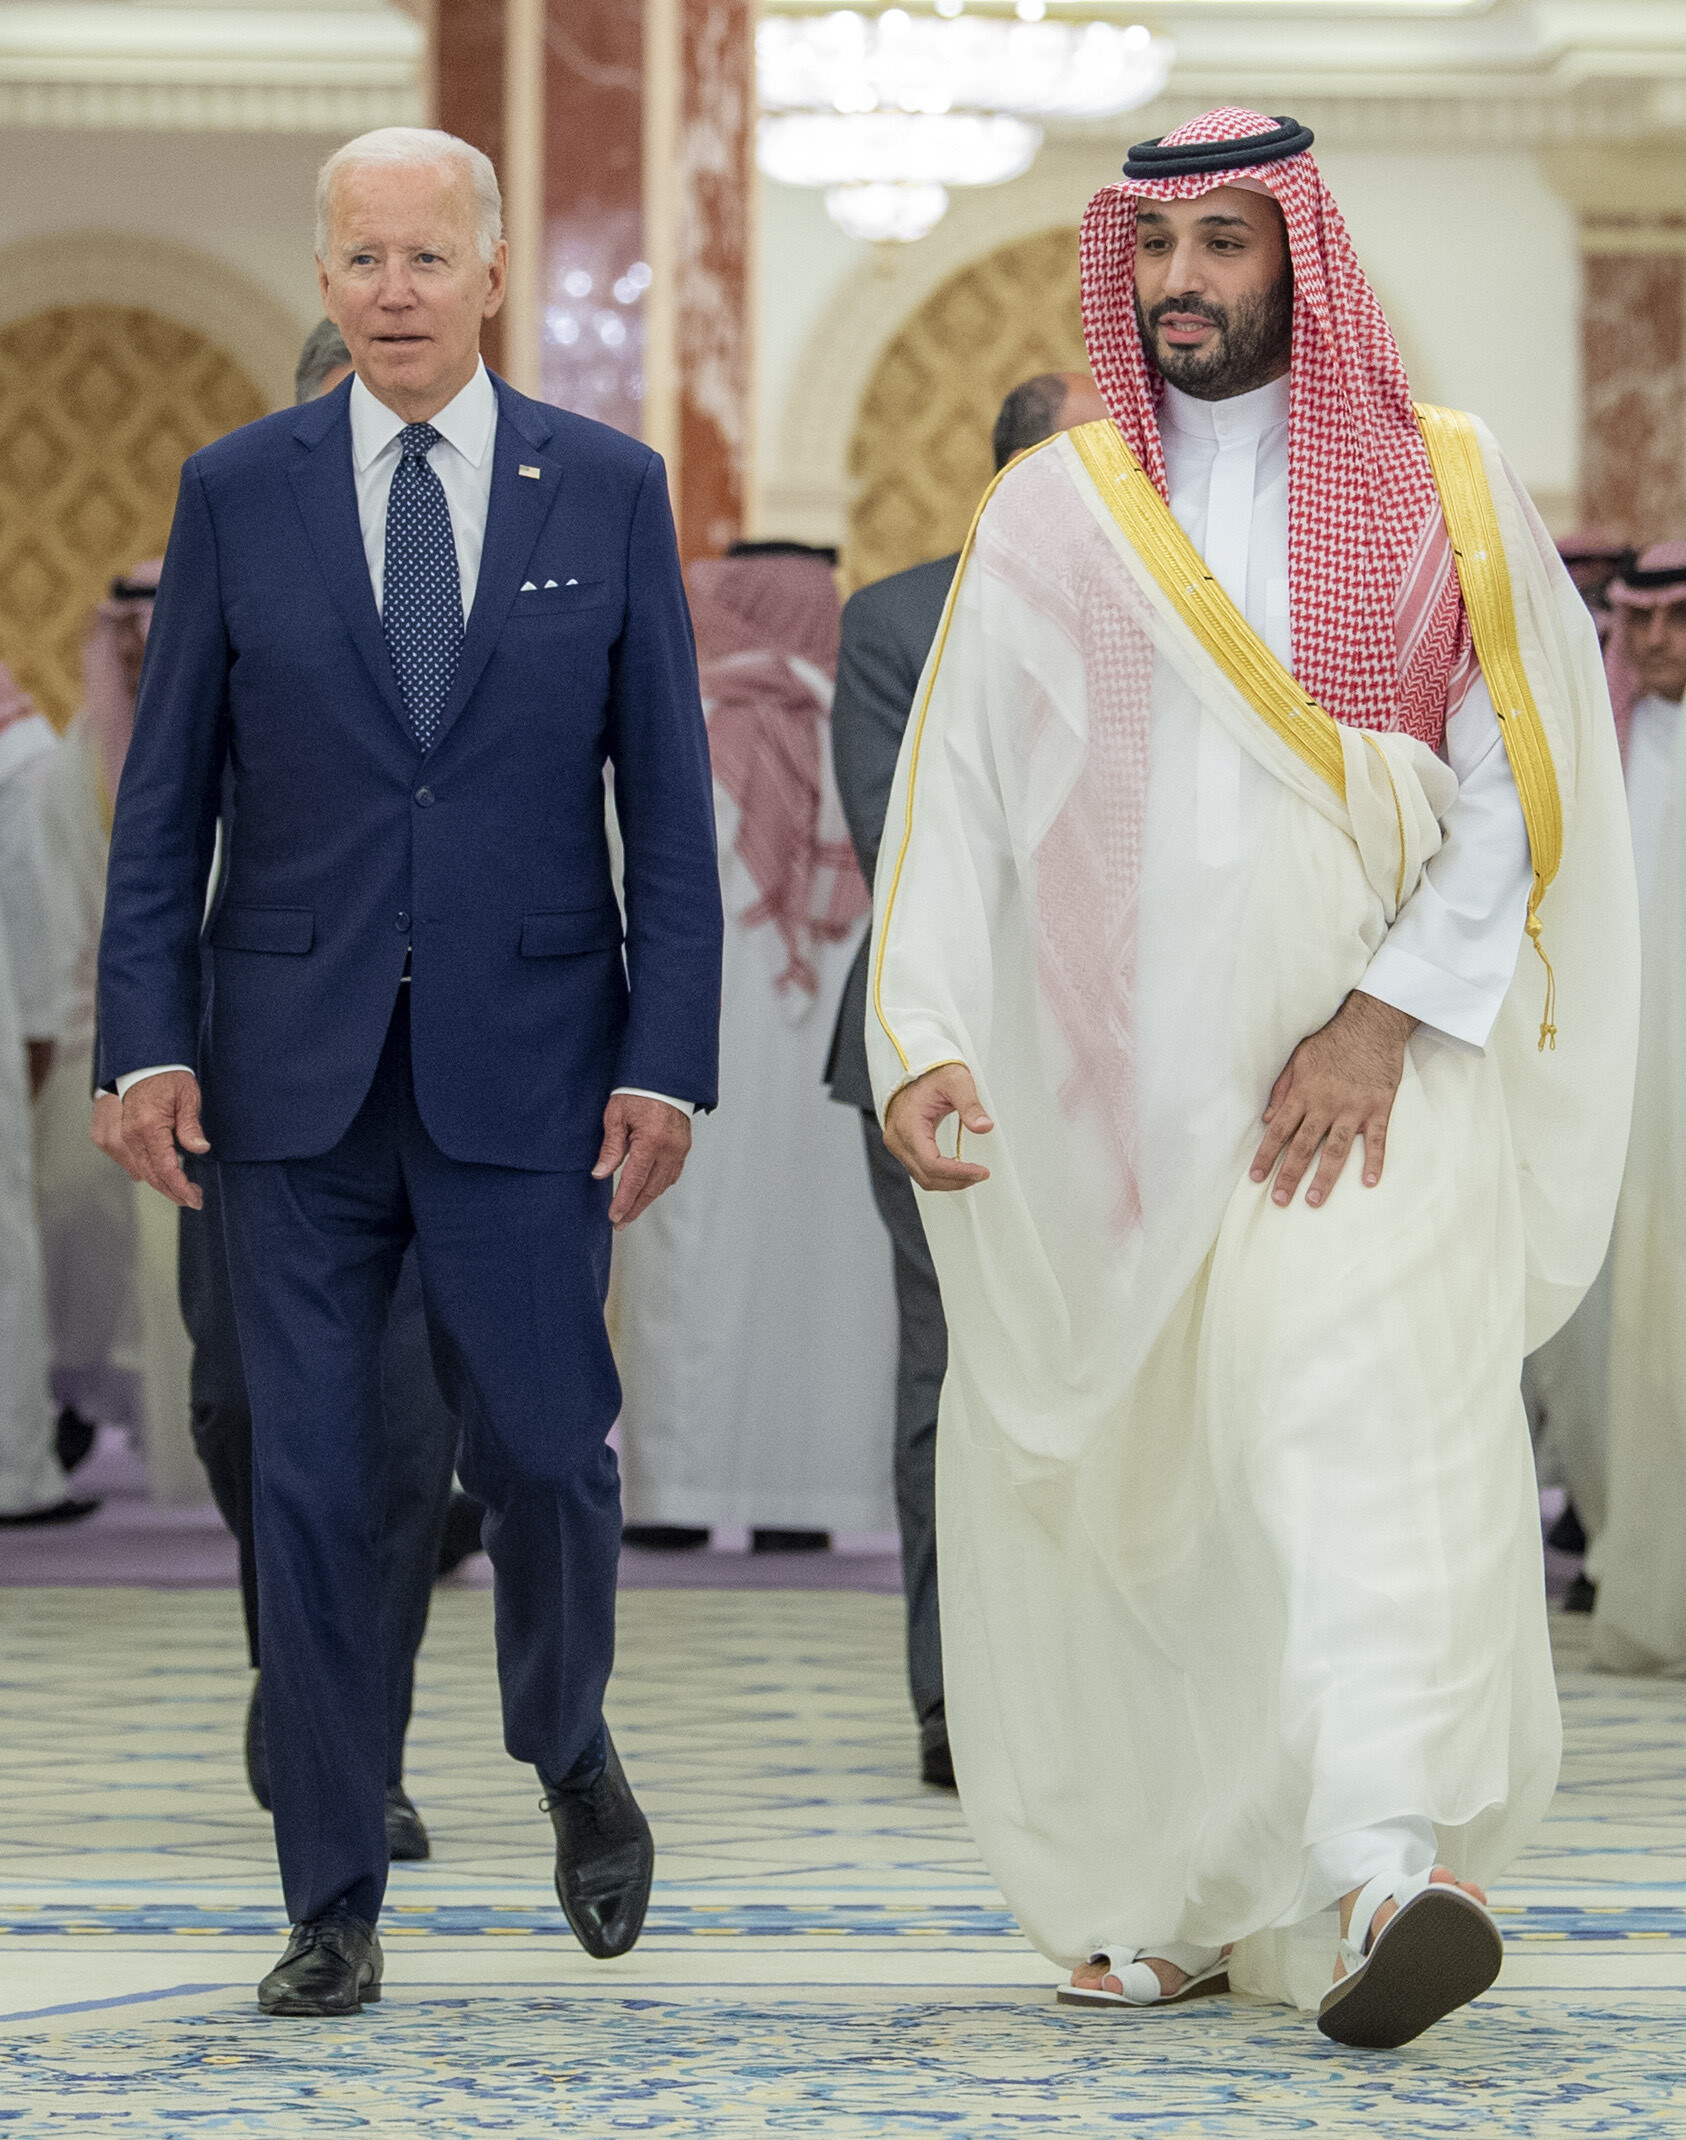 the crown prince walking with the president